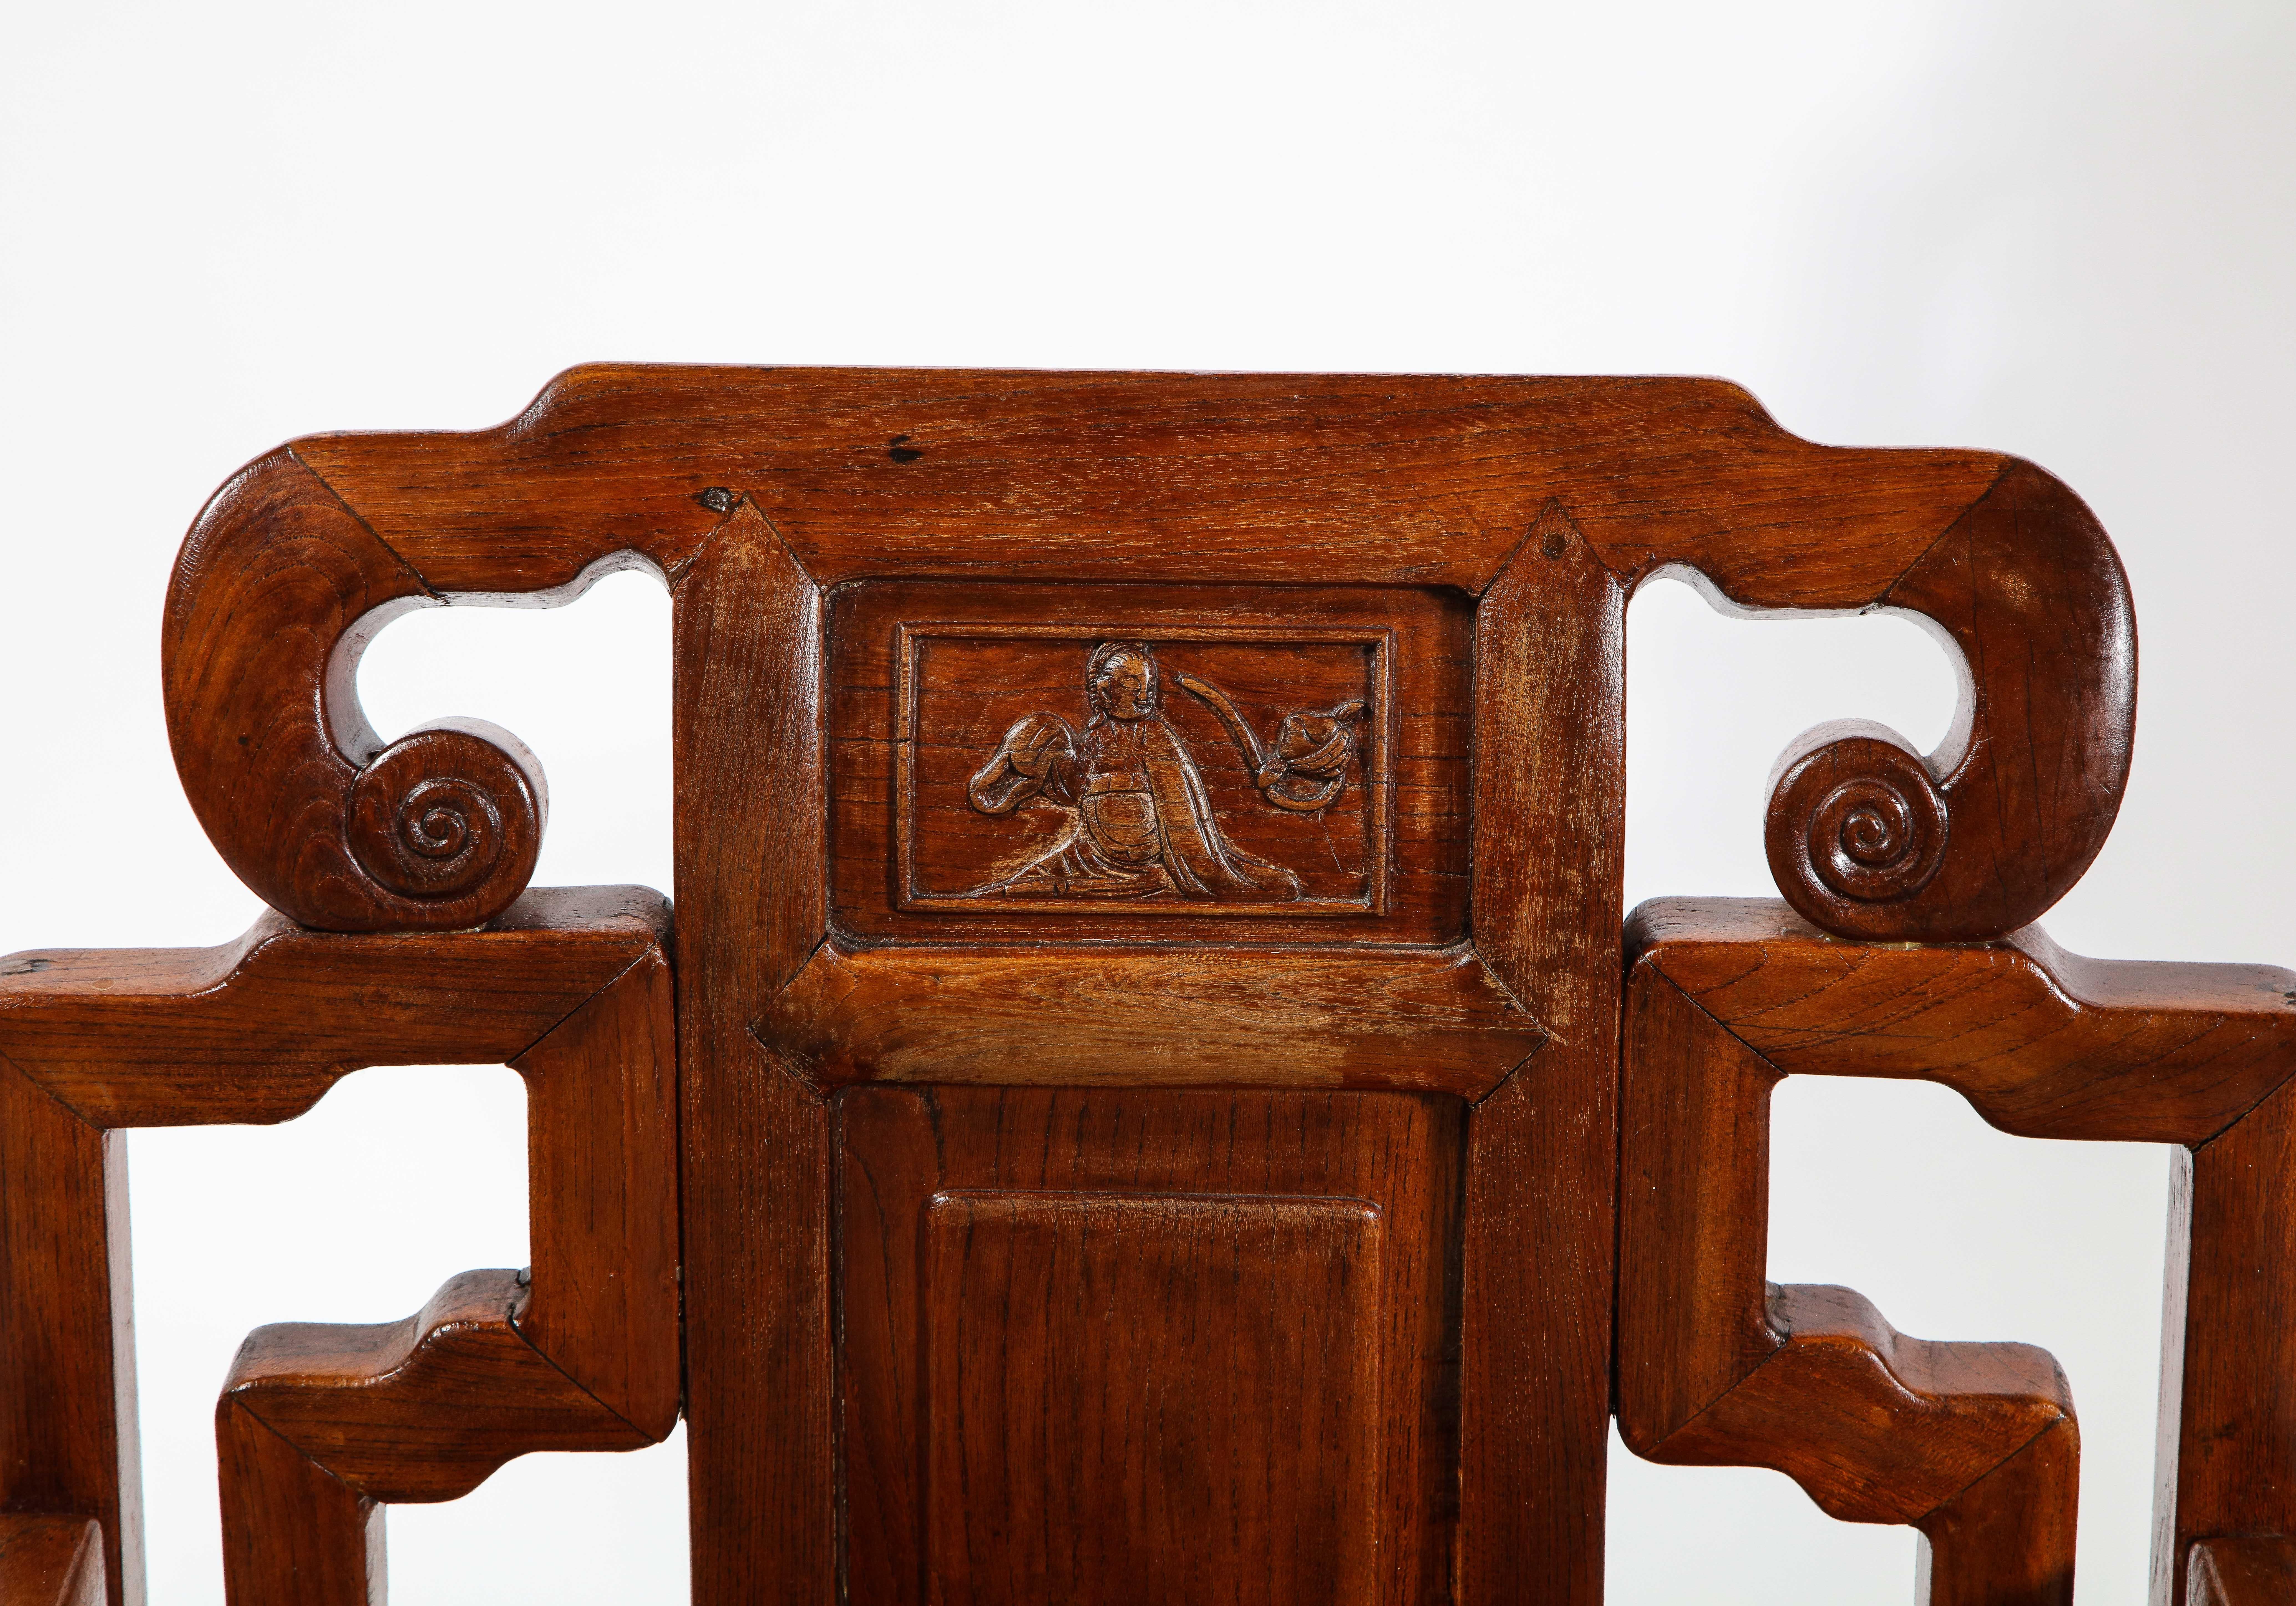 Pair of Chinese Hardwood Chairs with Fretwork Designs and High Relief Panels In Good Condition For Sale In New York, NY